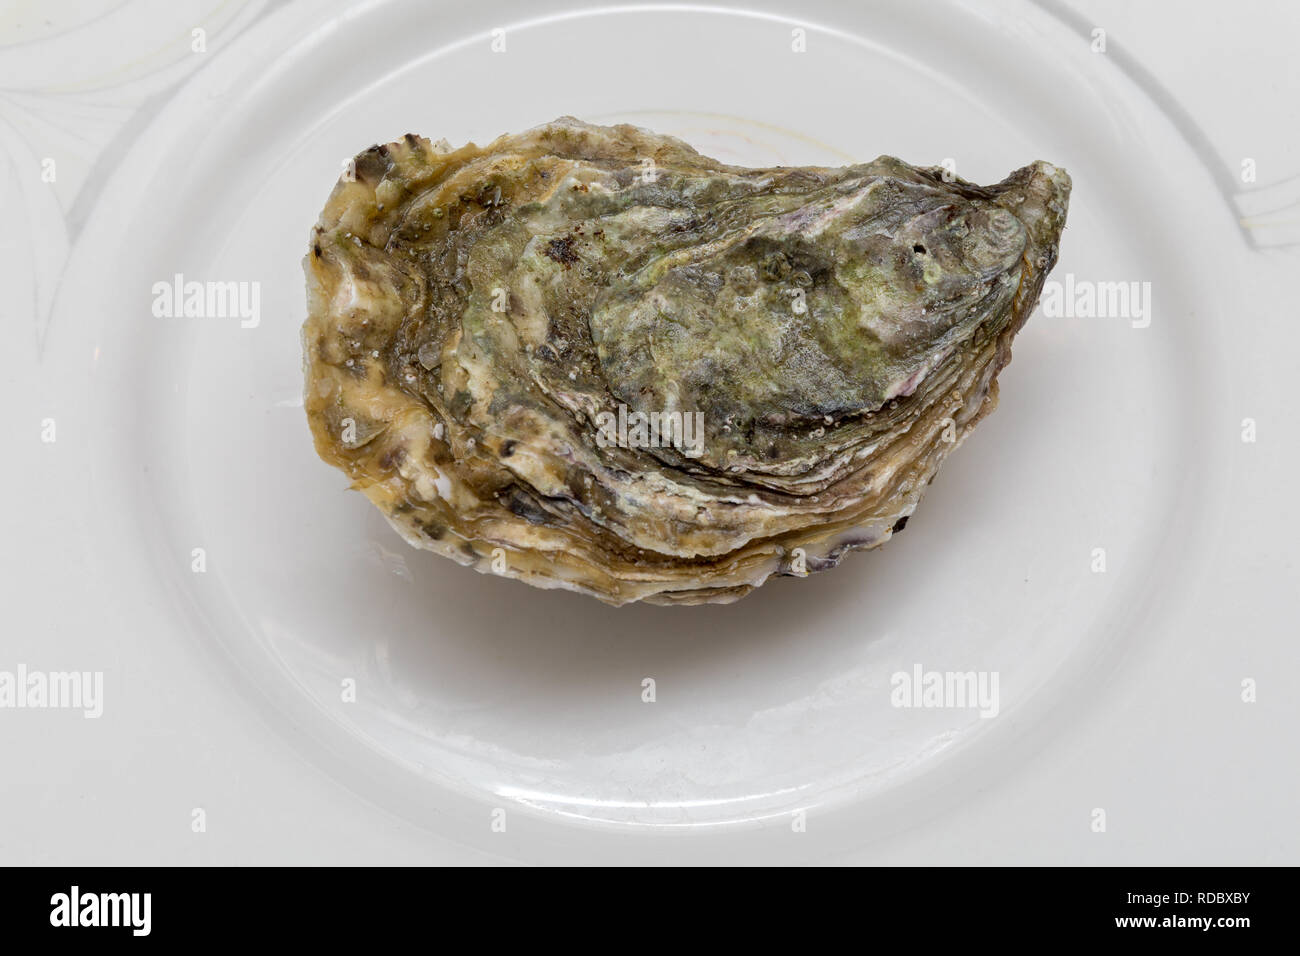 One Fresh Oyster at Plate Seafood Stock Photo